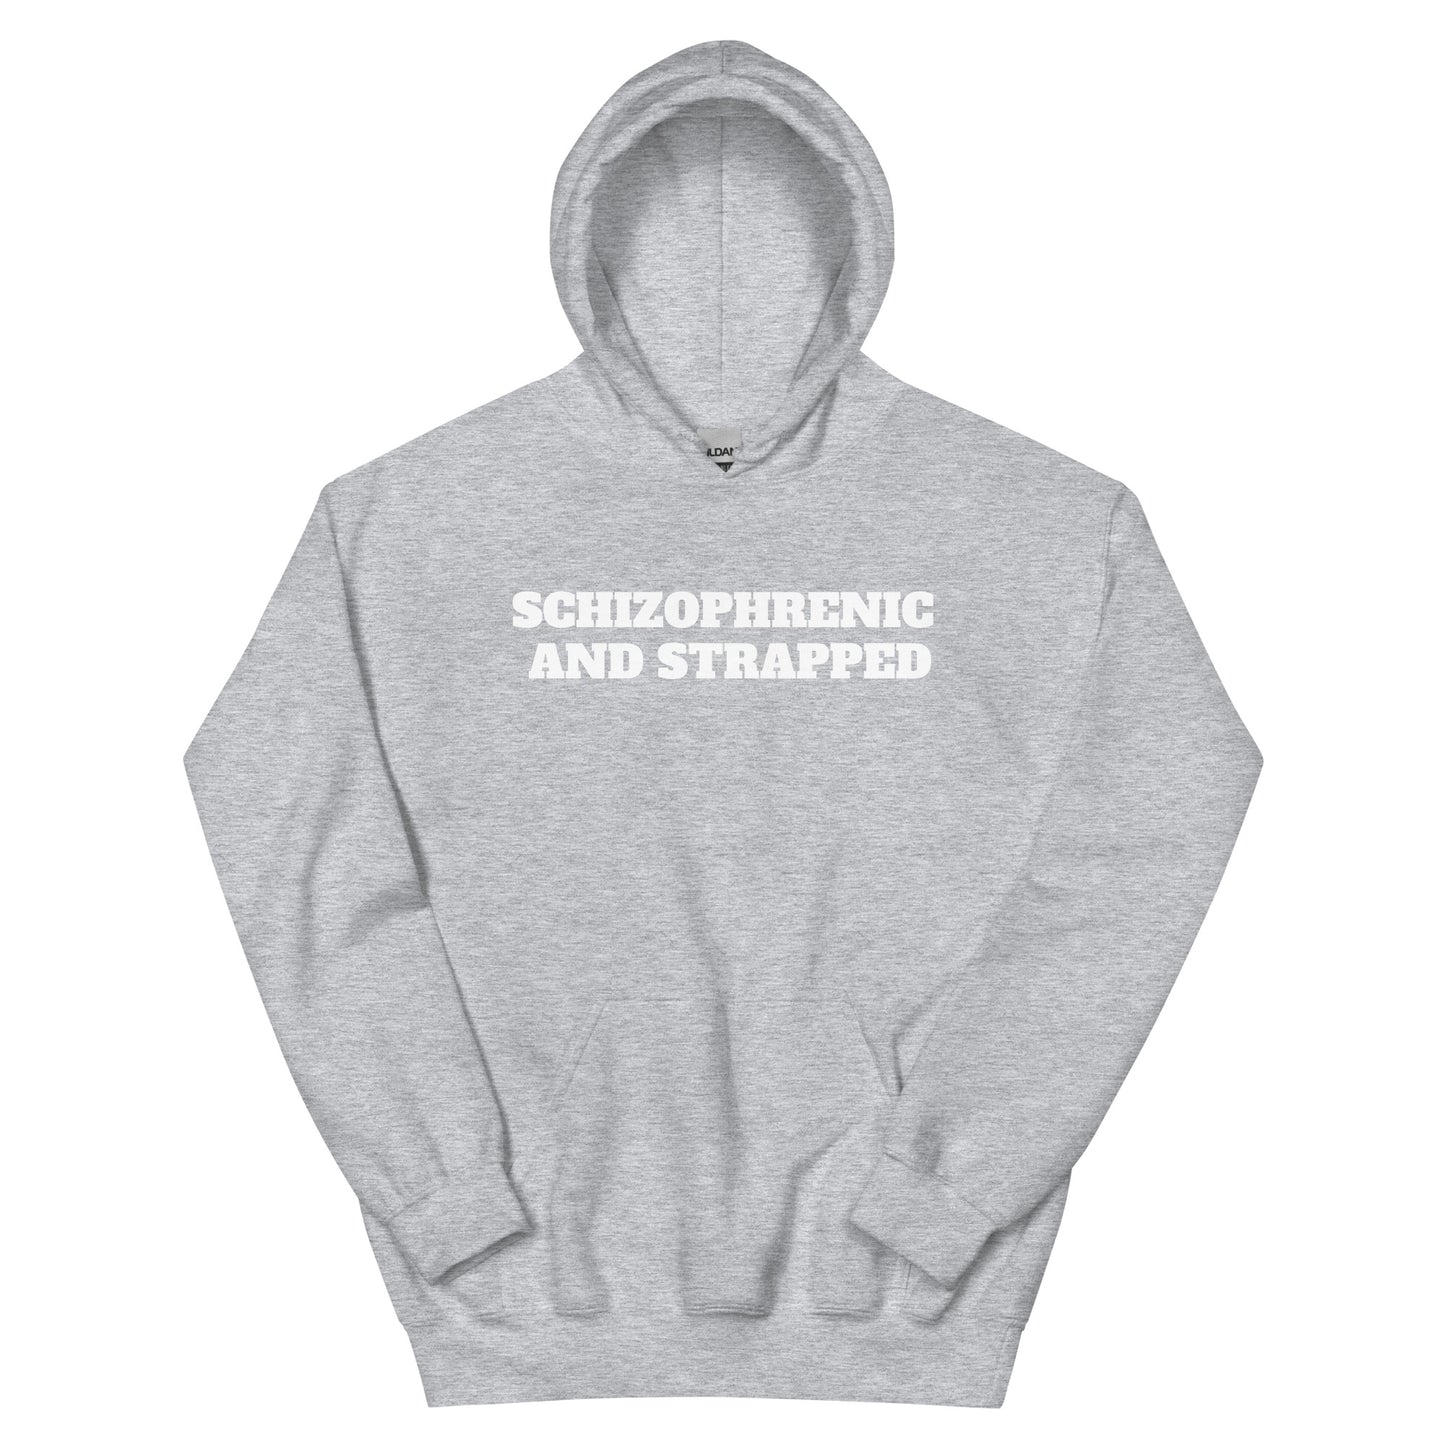 Schizophrenic And Strapped Hoodie